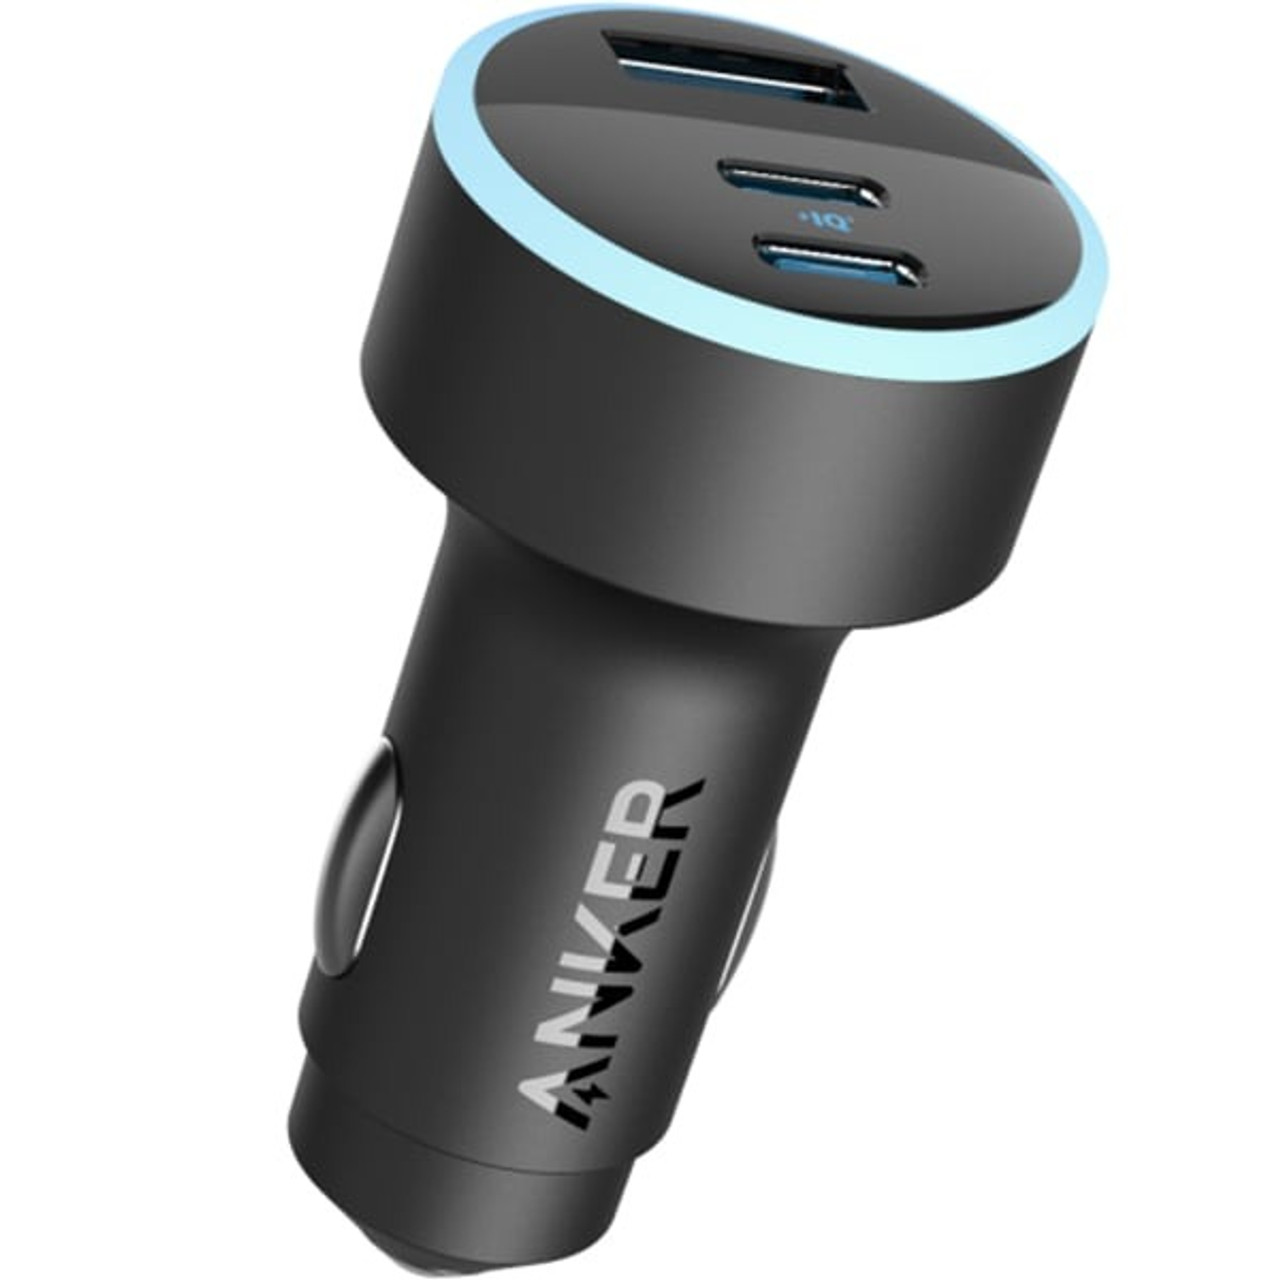 Anker 335 67W Car Charger - Black, A2736H11, AYOUB COMPUTERS